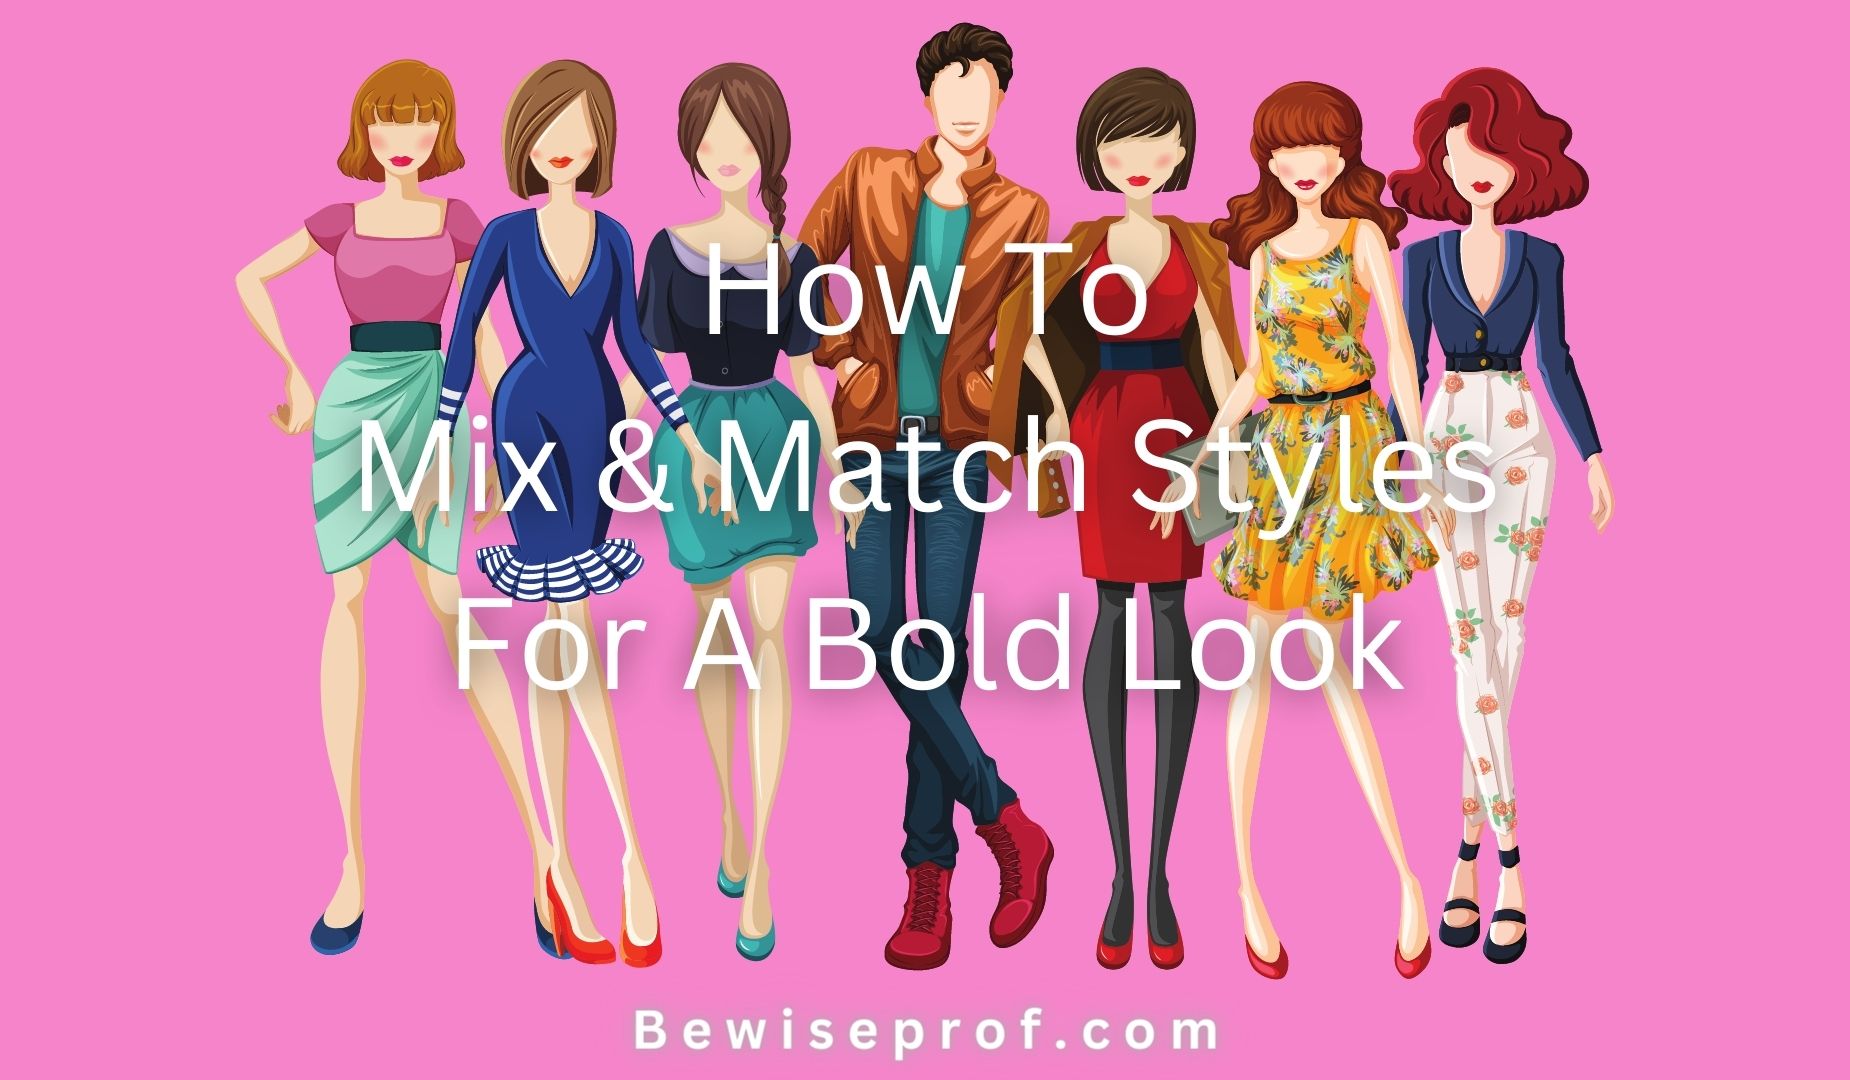 How To Mix And Match Styles For A Bold Look